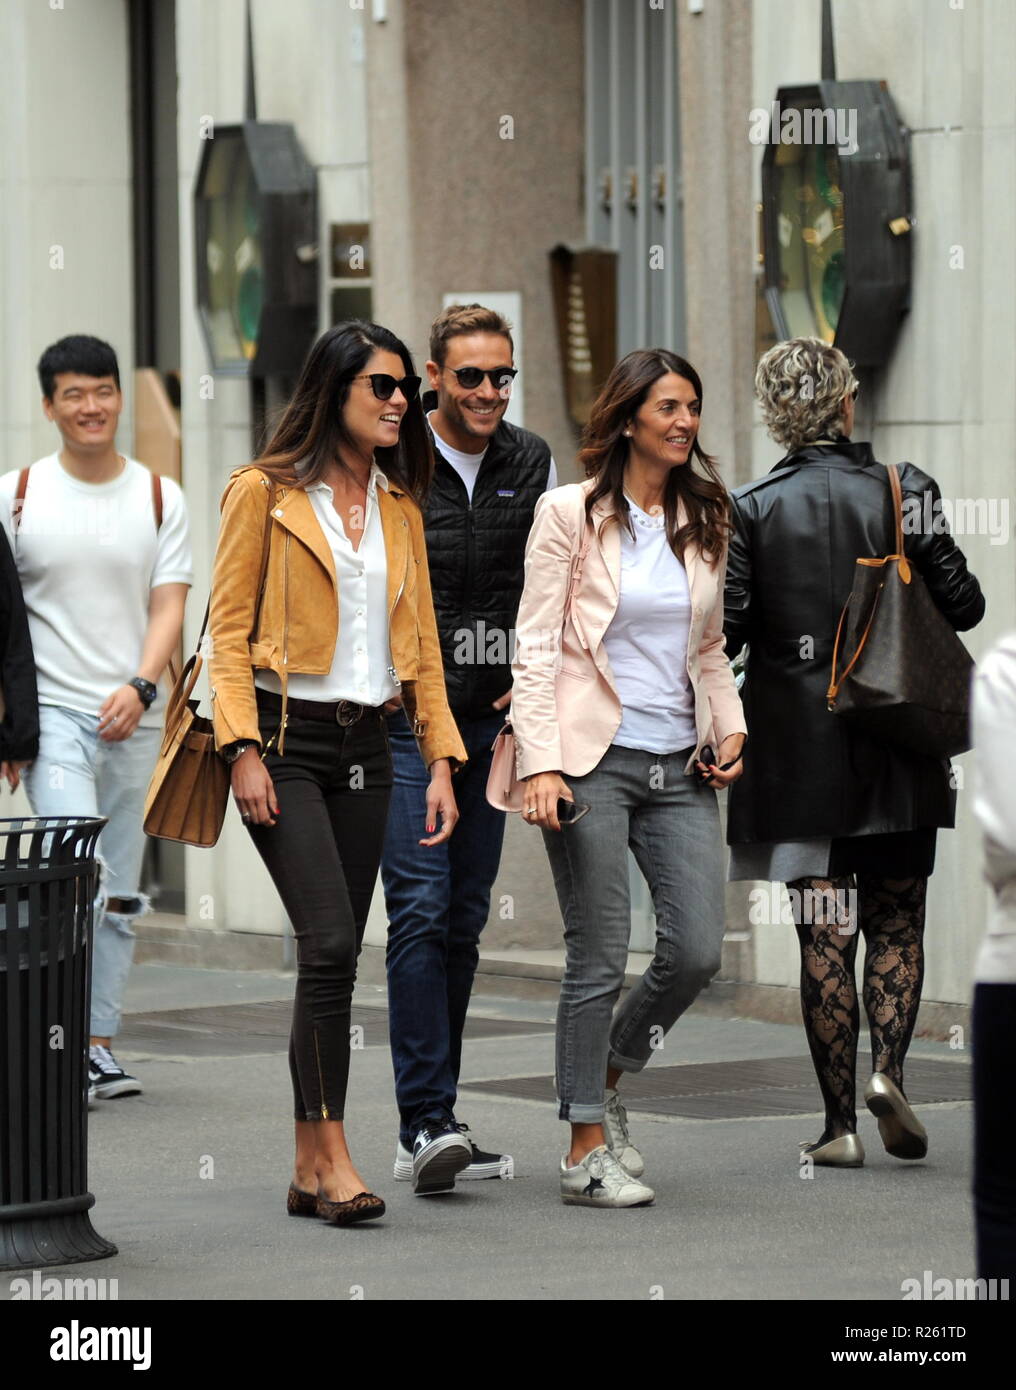 Daniela Ferolla, former Miss Italy 2001, Massimiliano Ossini, and his wife  Laura Gabrielli go to lunch downtown before returning back to their hotel  Featuring: Laura Gabrielli, Daniela Ferolla, Massimiliano Ossini Where:  Milan,